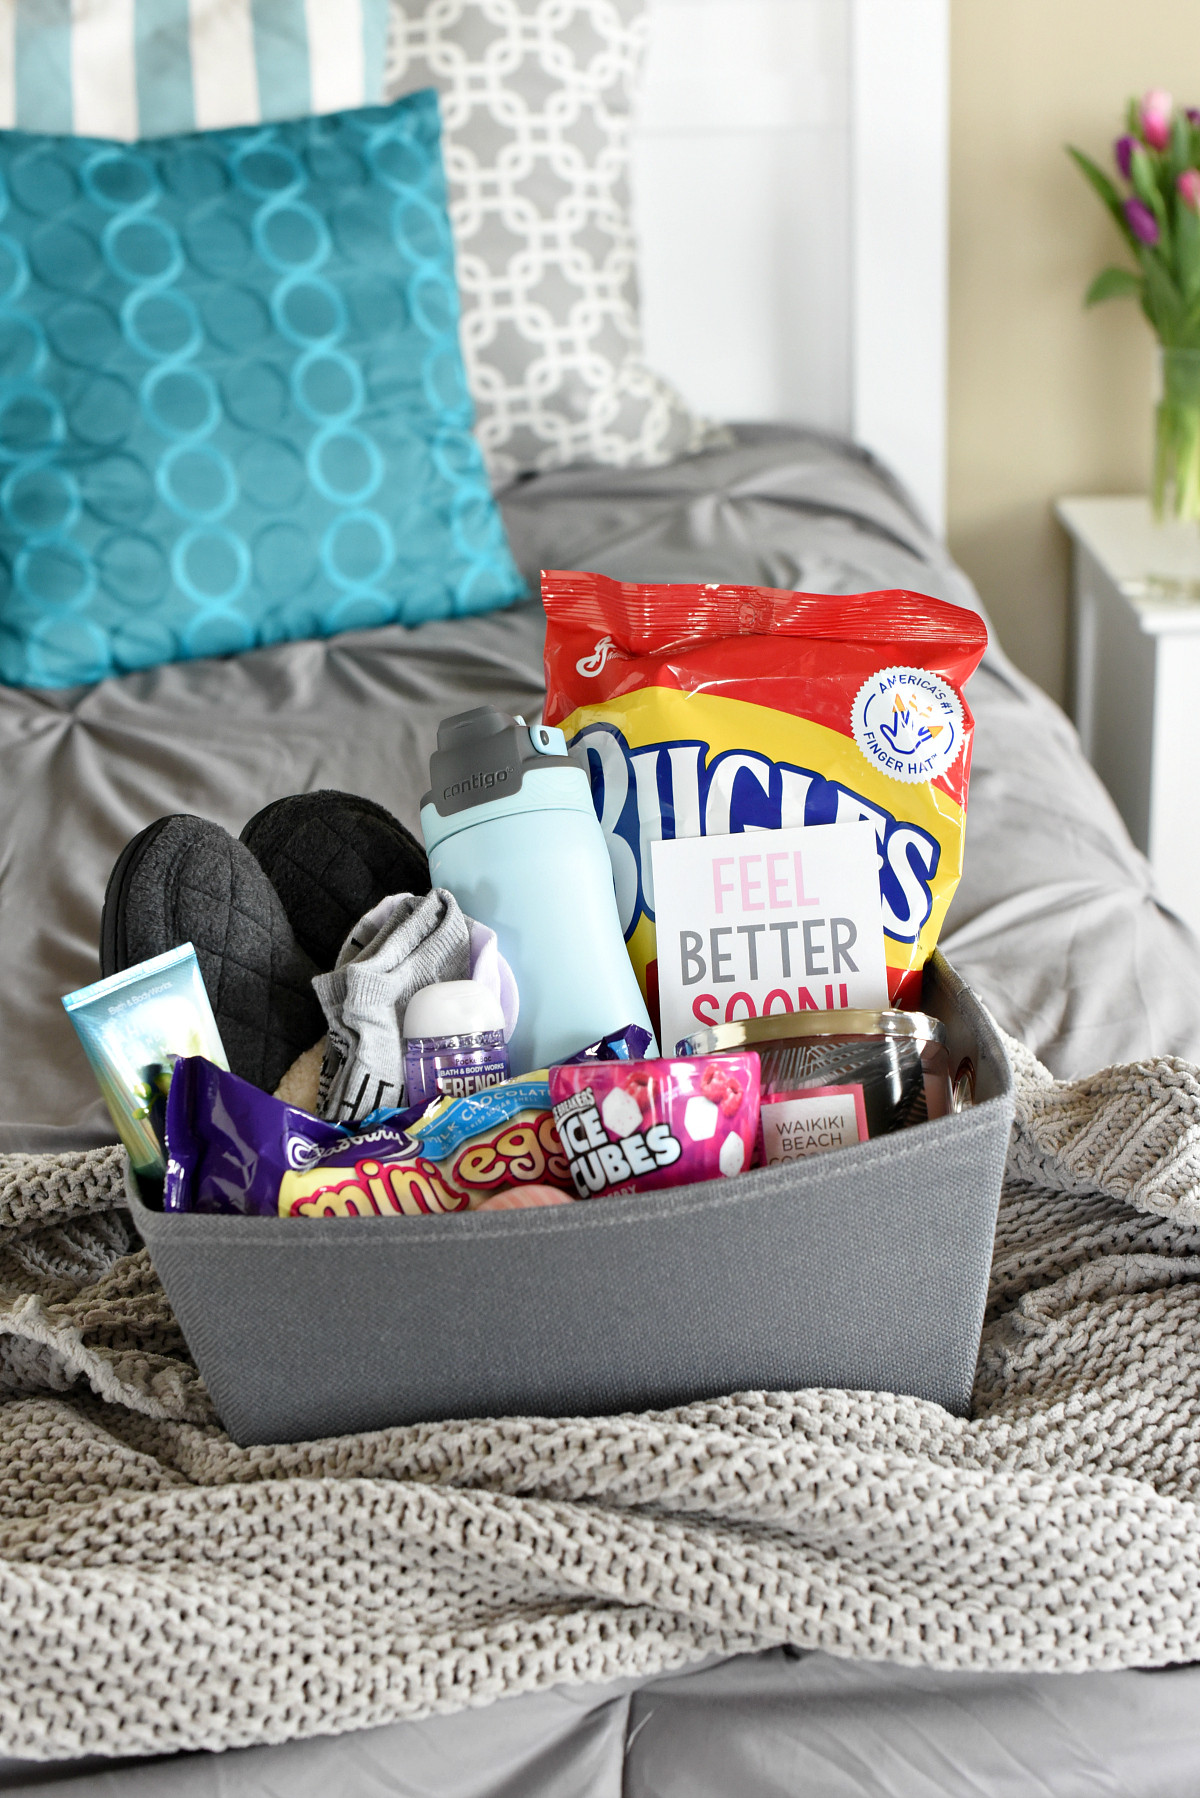 Get Well Soon Gift Baskets Ideas
 Get Well Soon Gift Ideas – Fun Squared